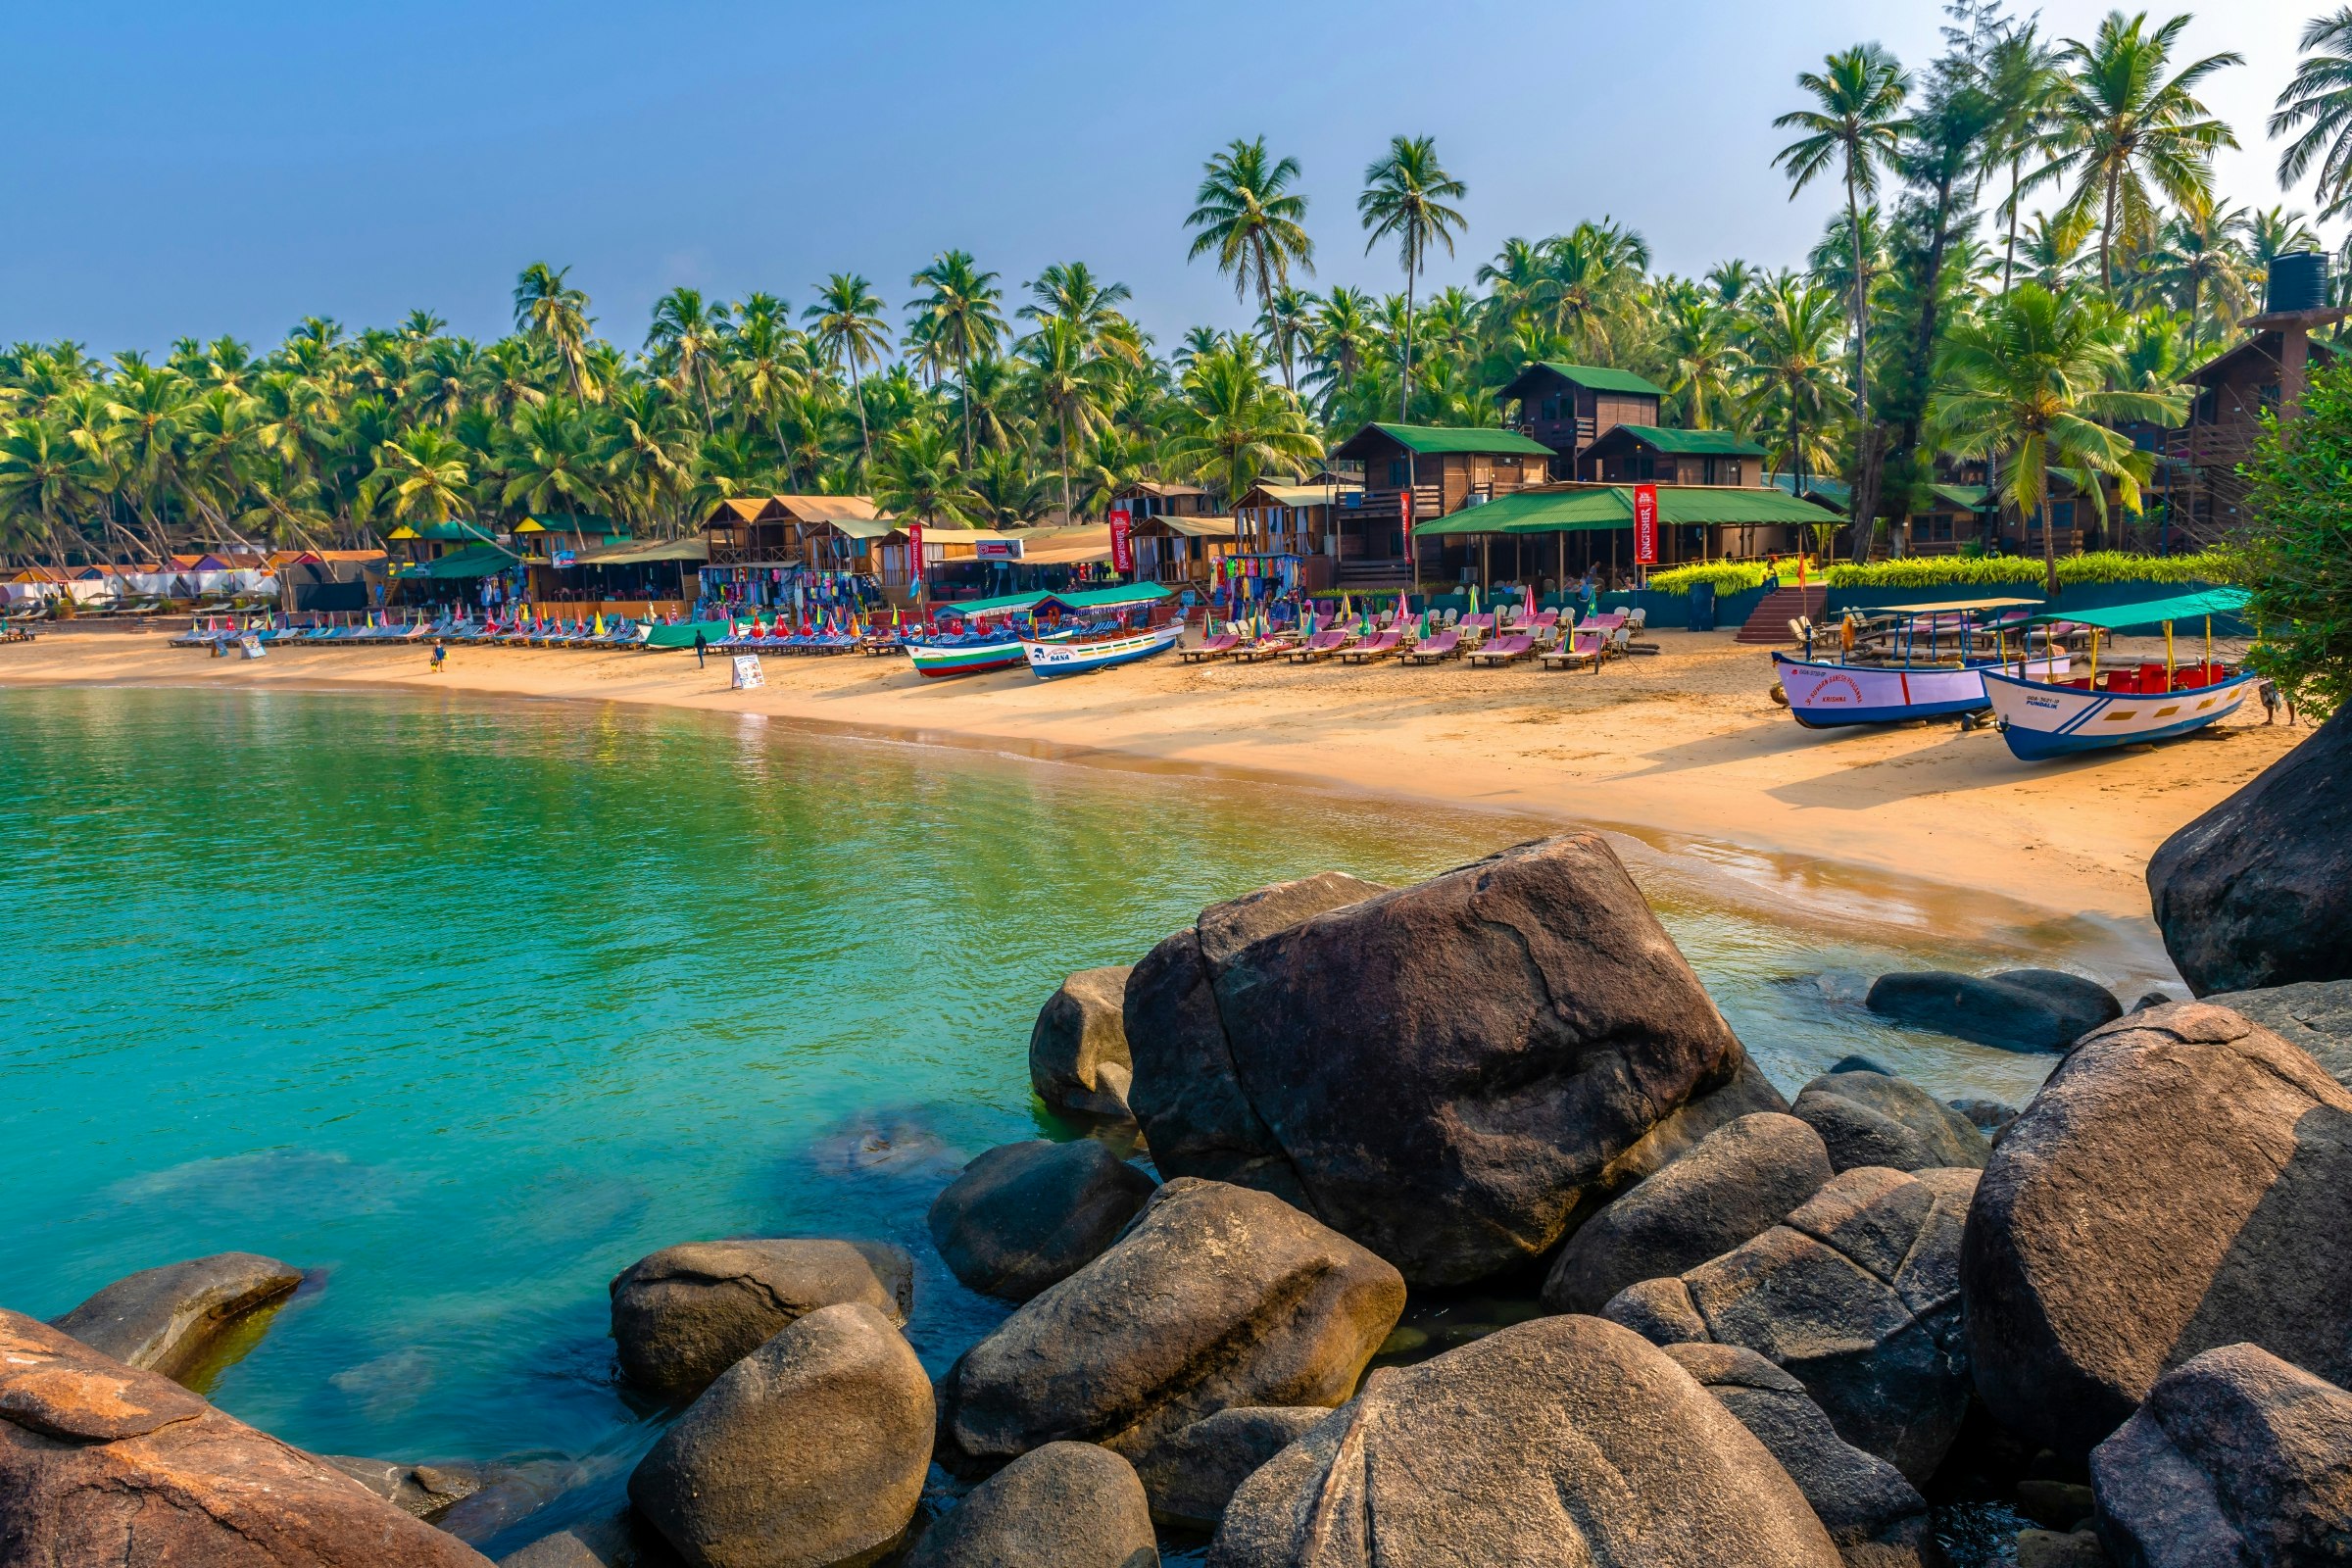 A row of colourful bungalows line the sands of Palolem in Goa. The sea is calm and blue, and behind the beach, palm trees are visible. A few people sit on the sand.